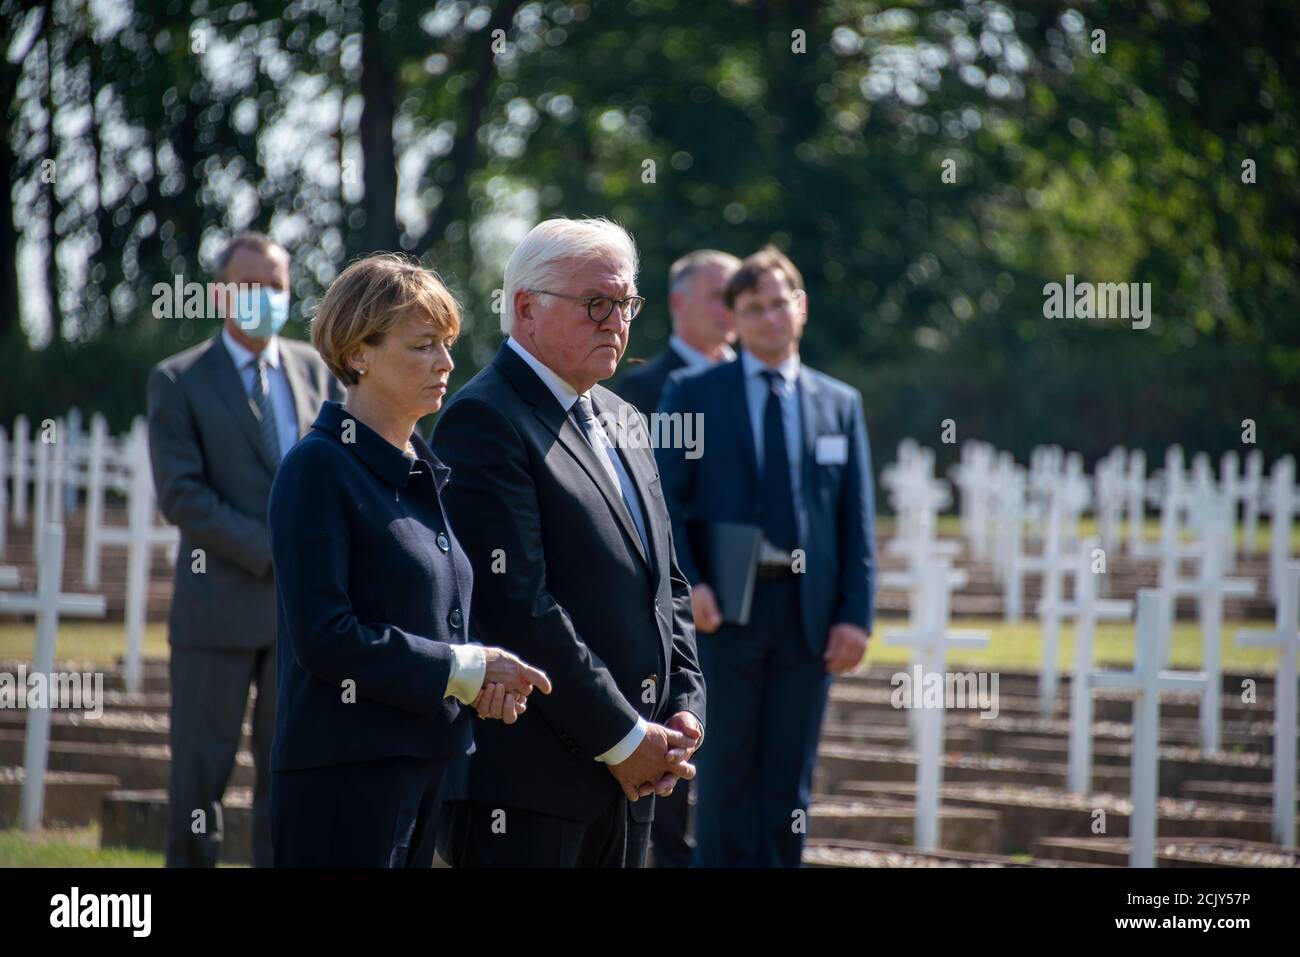 Germany, Saxony-Anhalt, Gardelegen, Federal President Frank-Walter Steinmeier and his wife Elke Büdenbender stand in silent remembrance at the graves of the Isenschnibbe field barn memorial in Gardelegen. On April 13, 1945, over 1000 concentration camp prisoners were driven by the Nazis into a barn that was subsequently set on fire. There were only a few survivors of the massacre. A new documentation center commemorates this crime shortly before the end of the war. Credit: Mattis Kaminer/Alamy Live News Stock Photo